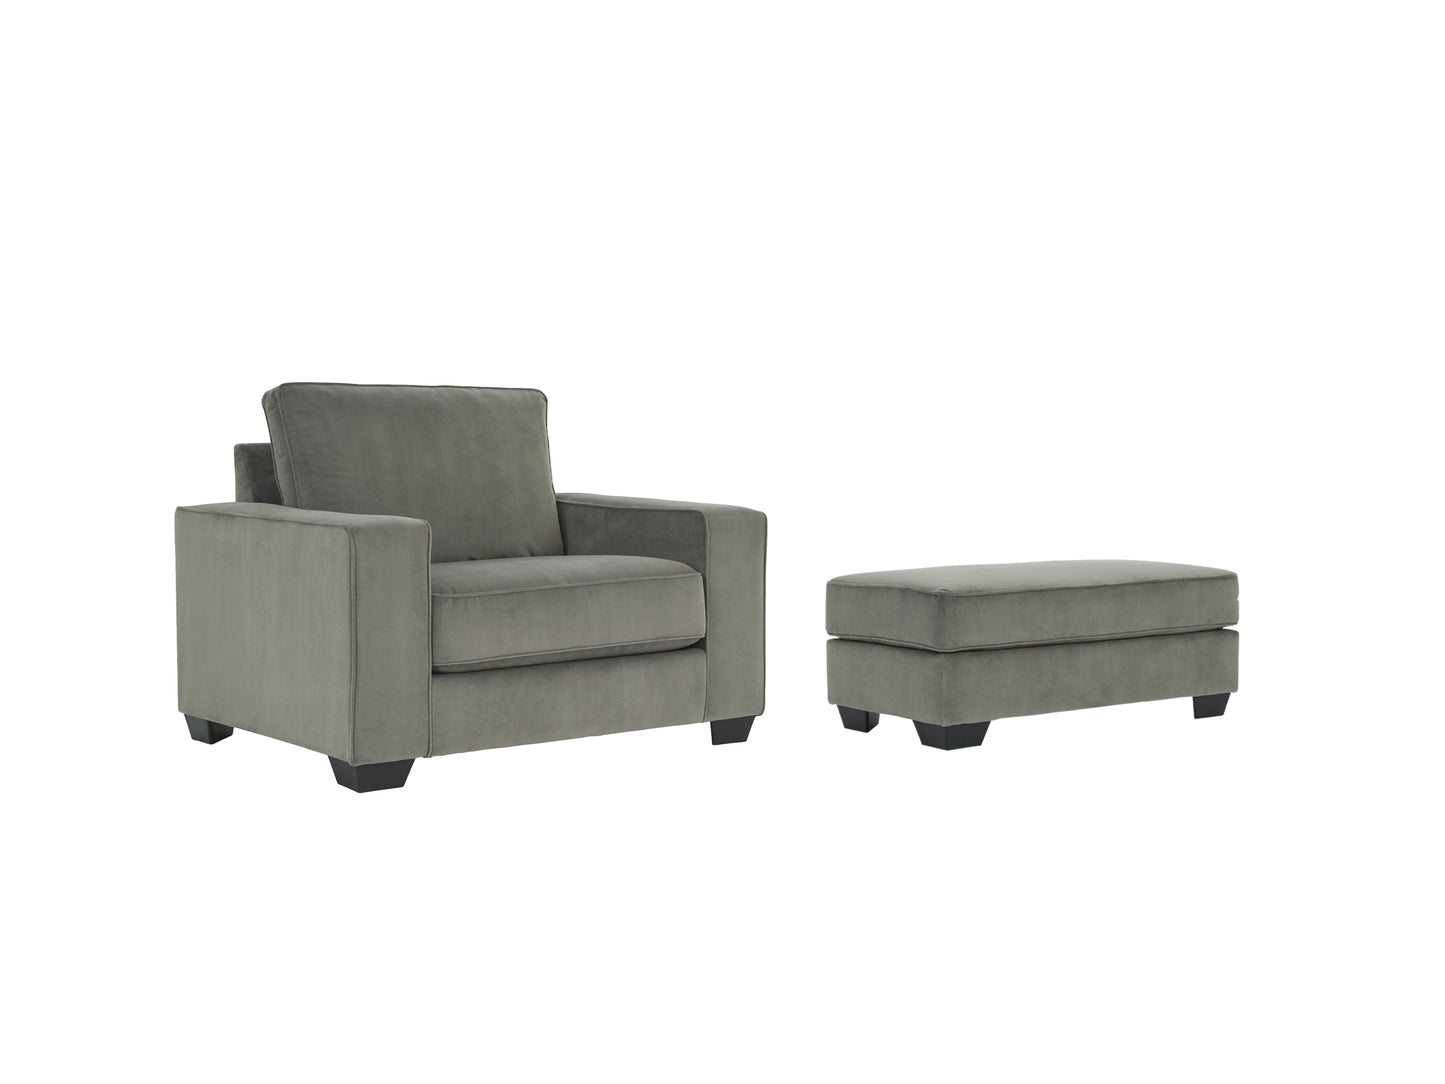 Angleton Sandstone Oversized Chair and Ottoman